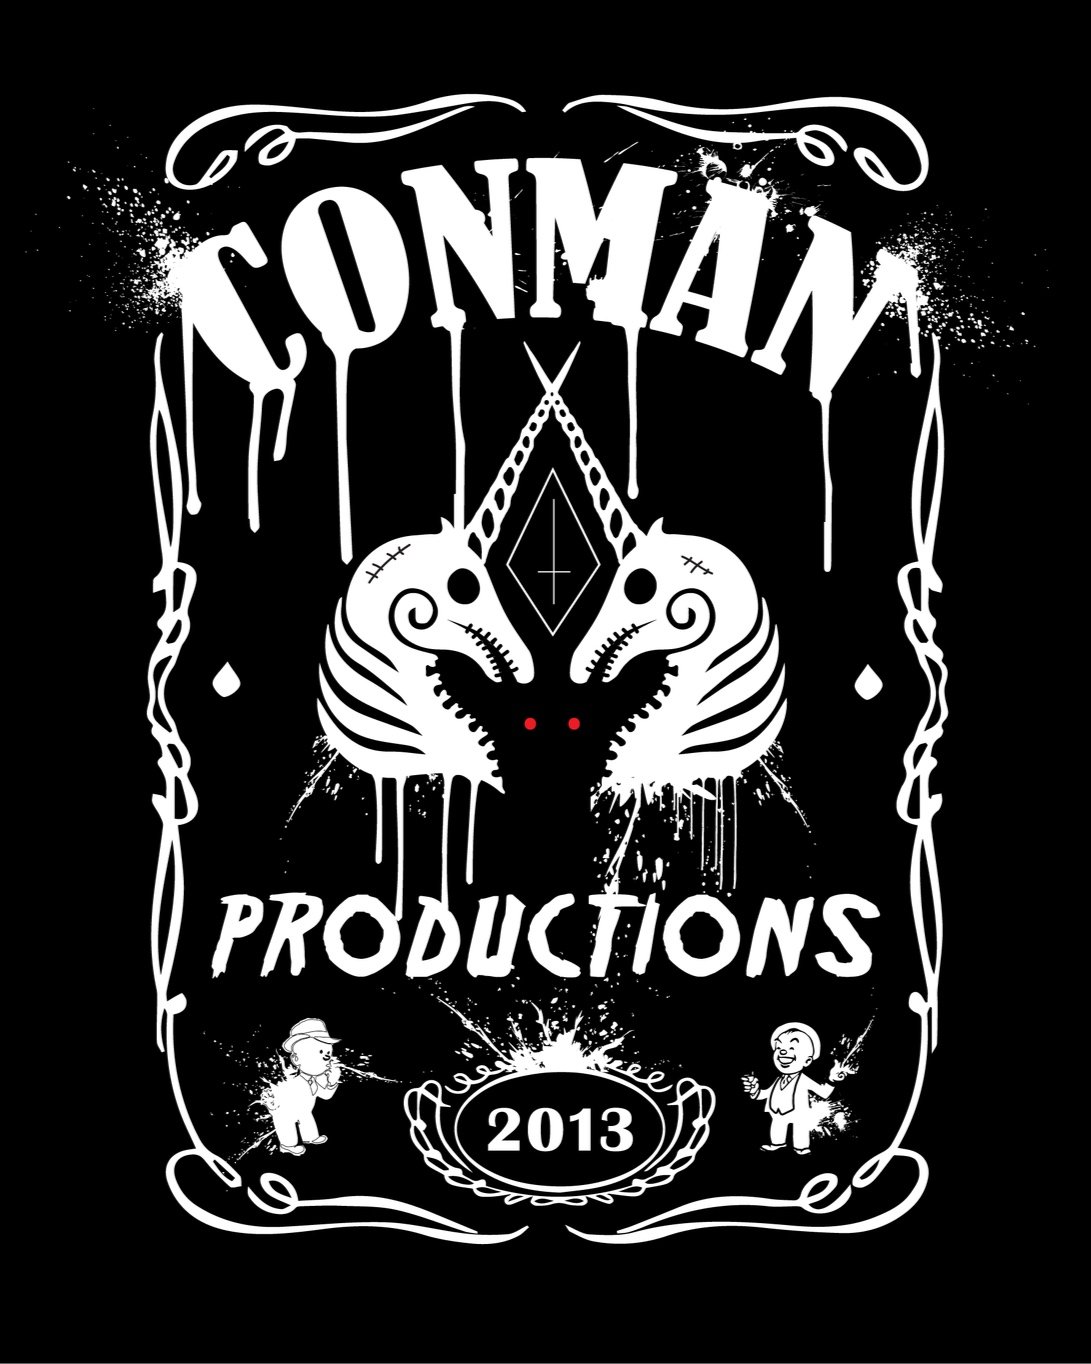 Conman Productions